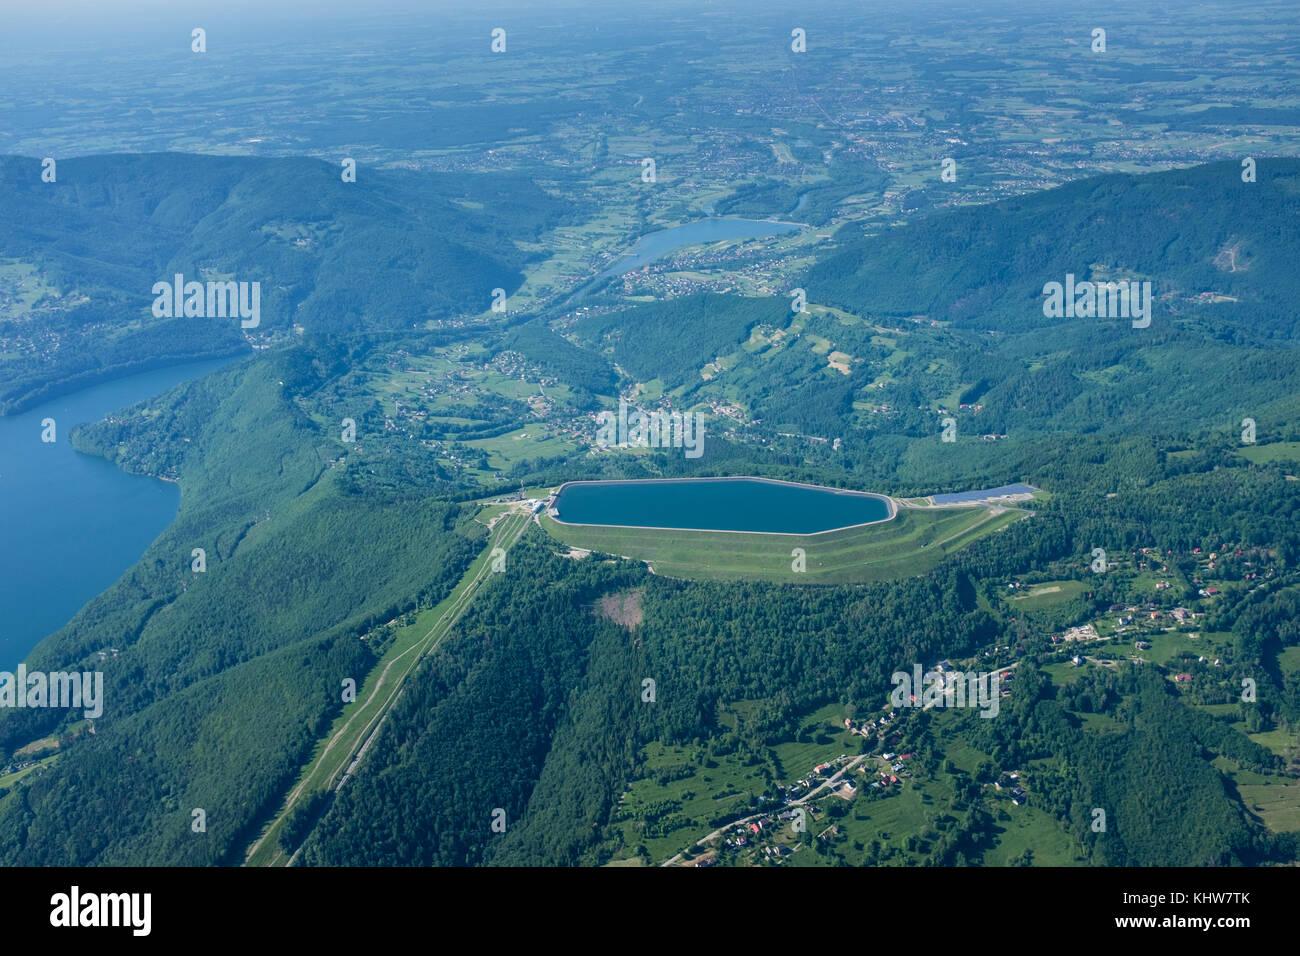 Aerial view of Water basin at Zar mountain power station in Beskidy mountains, Silesia, Poland Stock Photo